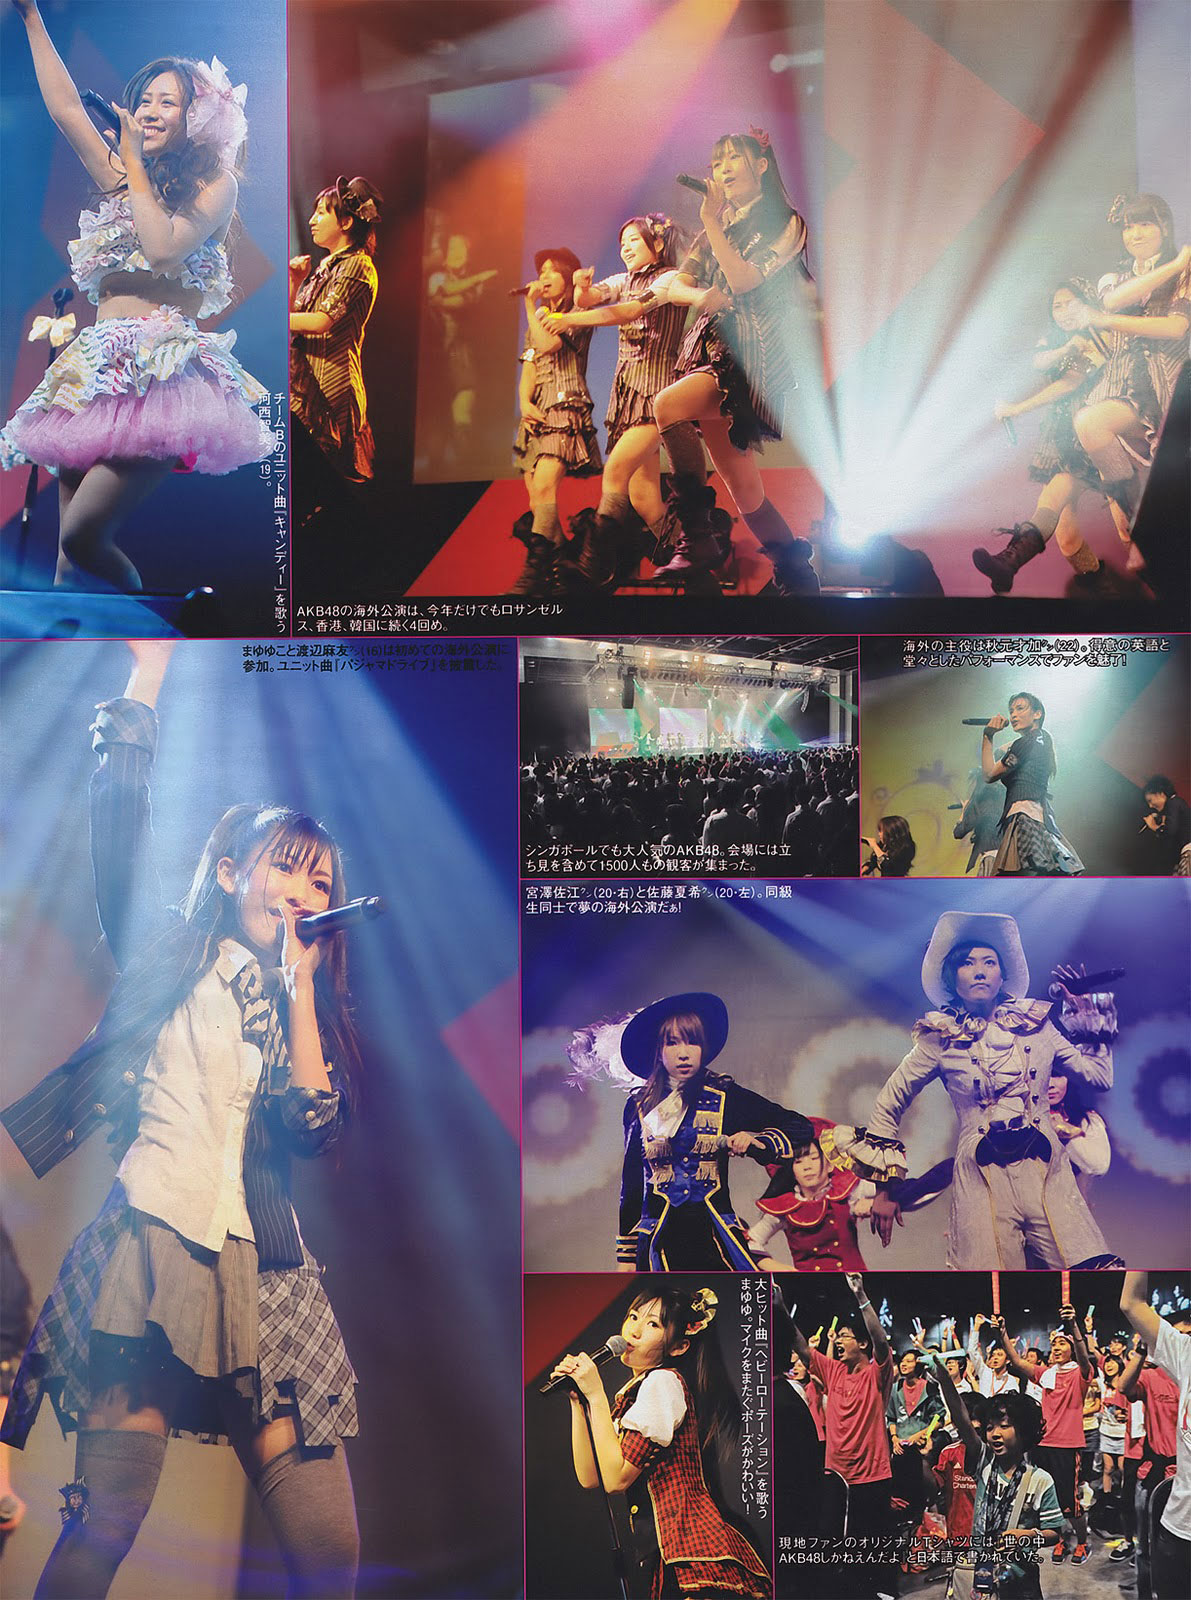 AKB48 in Singapore concert